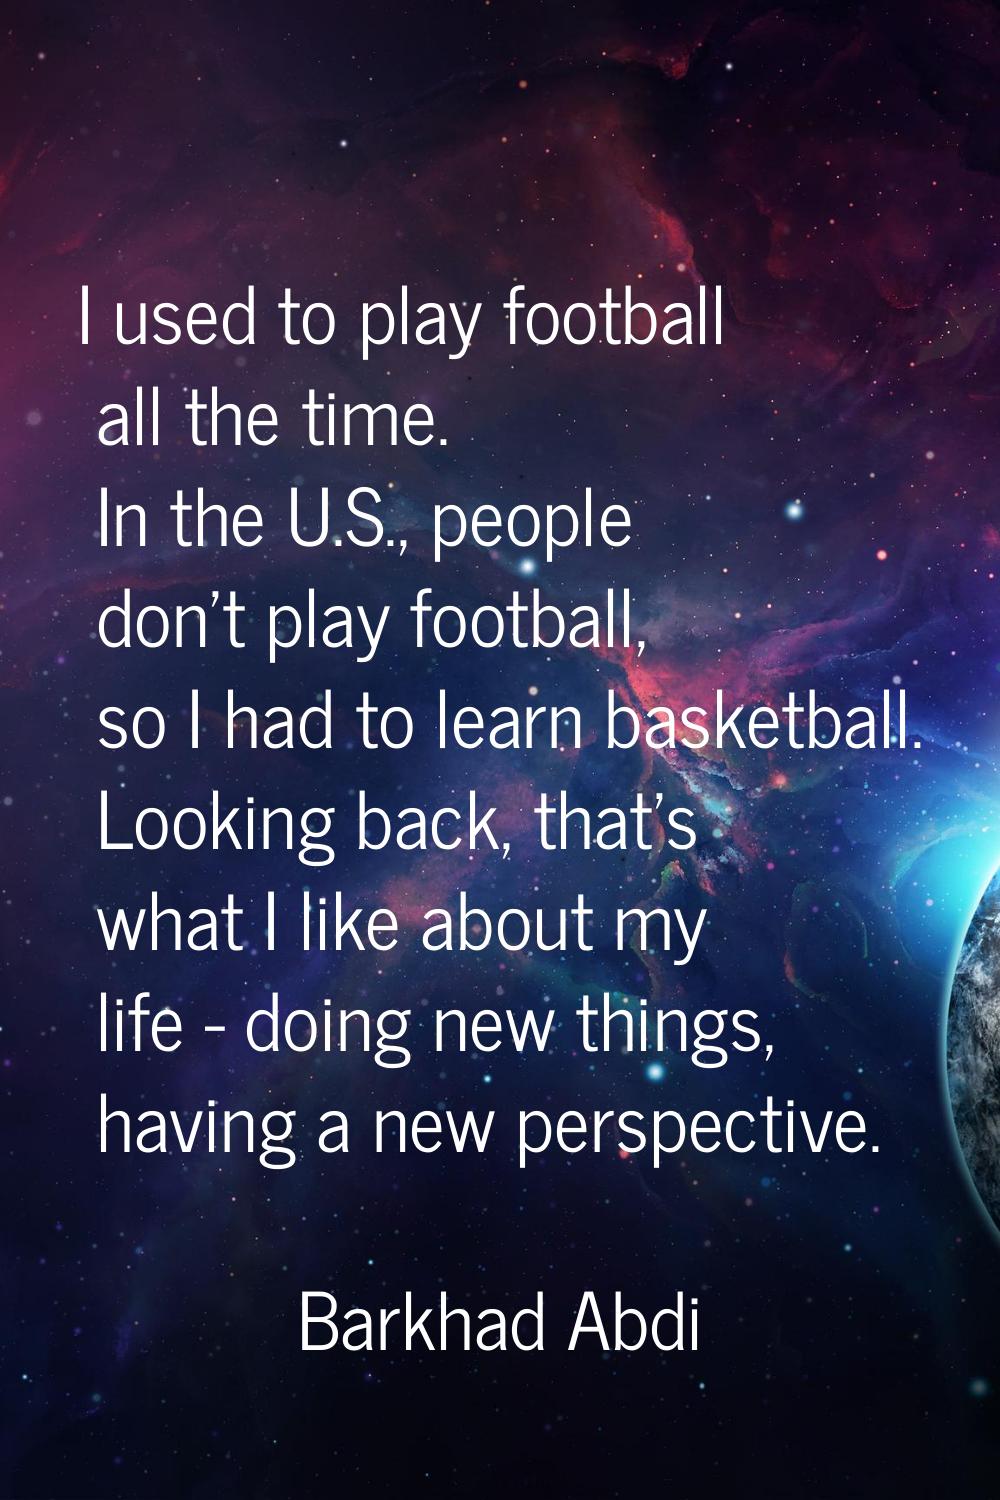 I used to play football all the time. In the U.S., people don't play football, so I had to learn ba